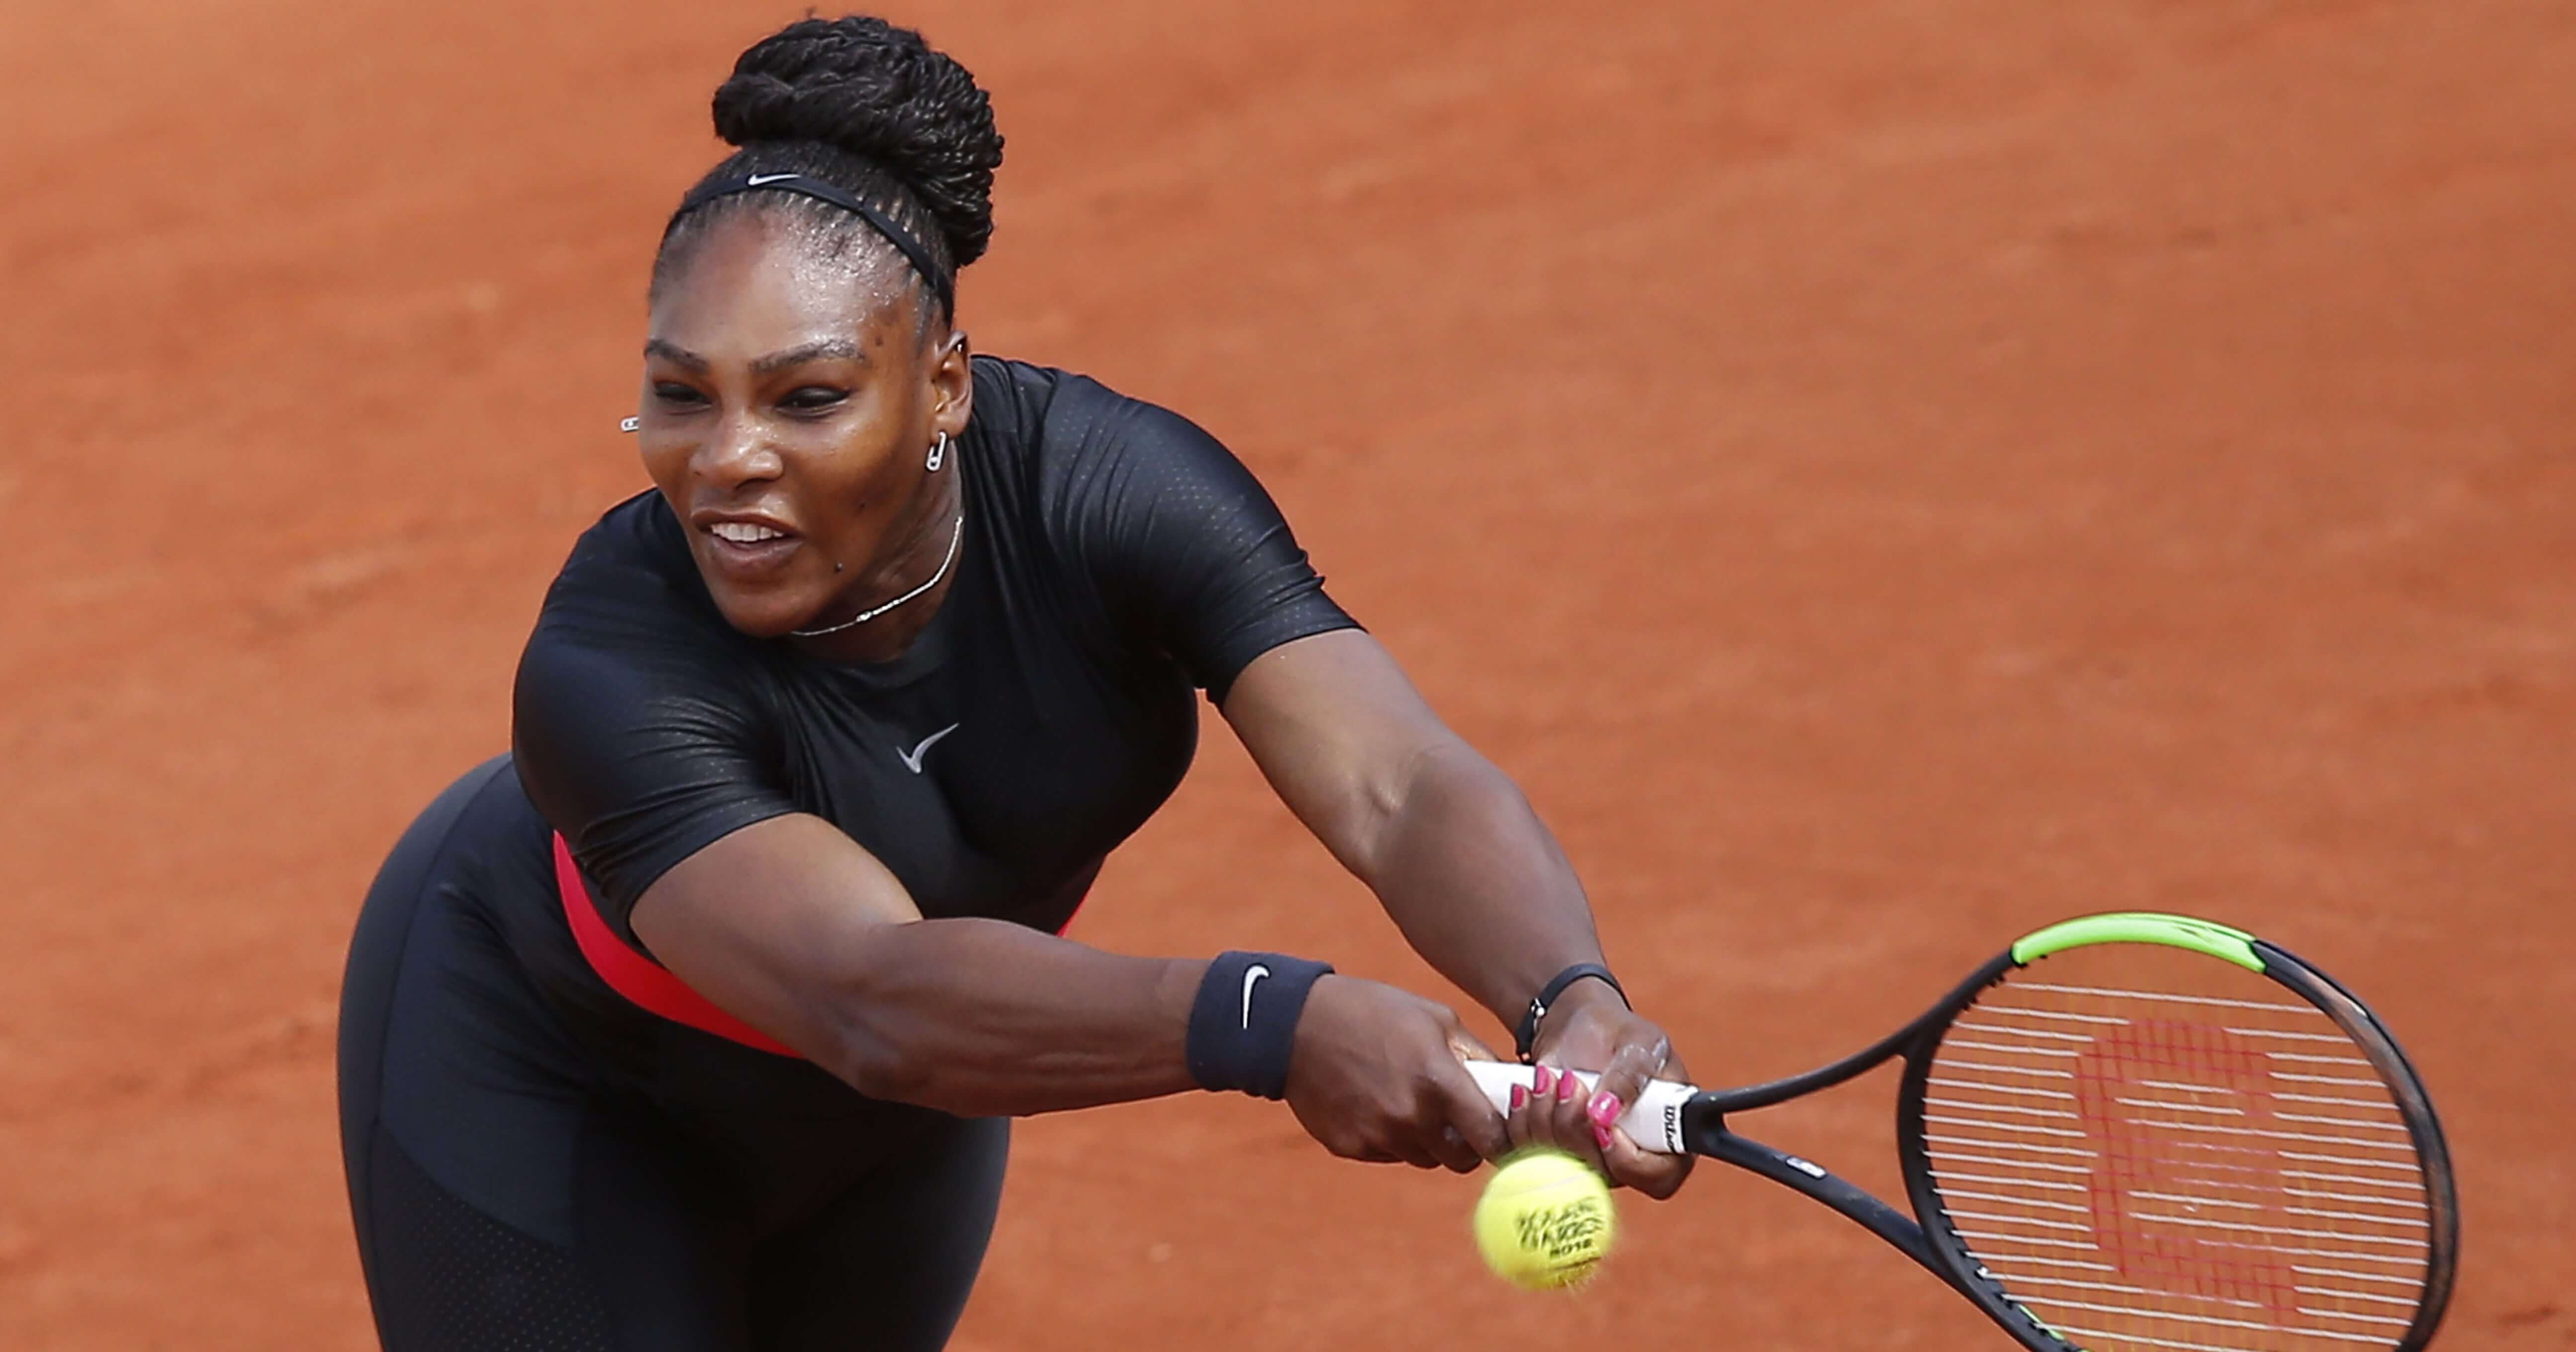 Serena Williams returns a shot against Krystyna Pliskova on May 29 during their first-round match in the French Open.